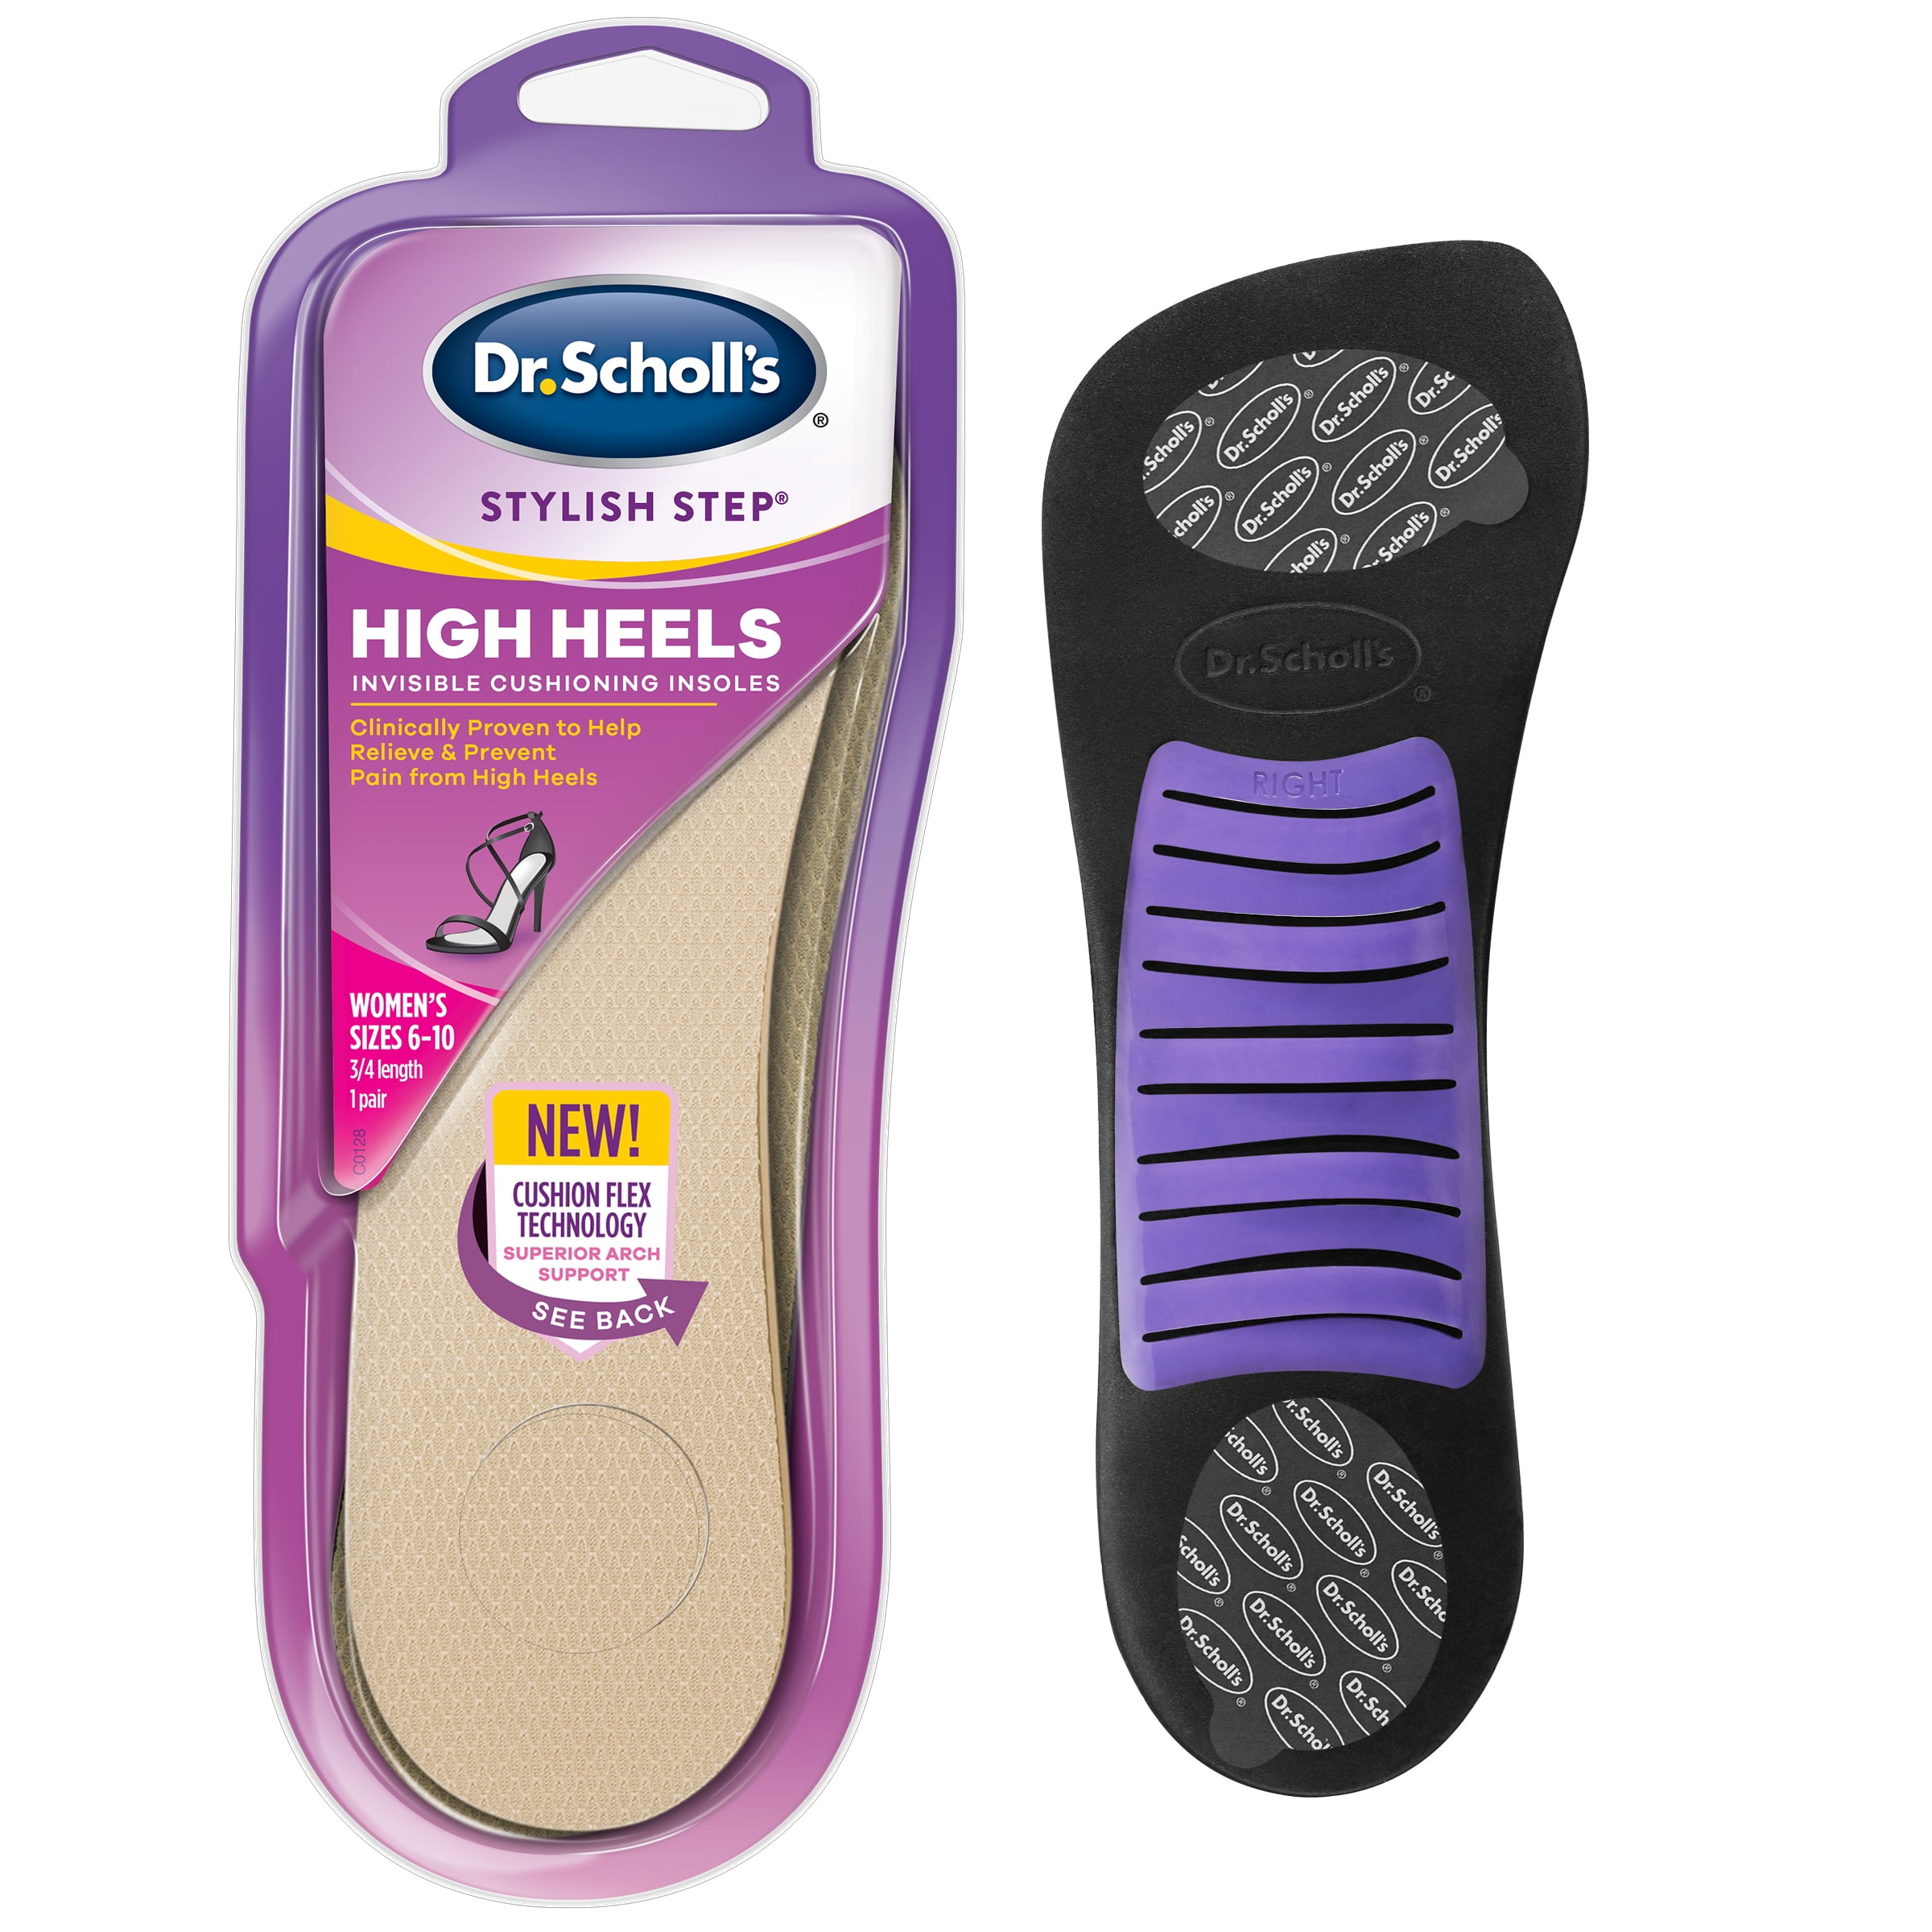 Stylish Step® High Heel ¾ Insoles for High Heels | Dr. Scholl's